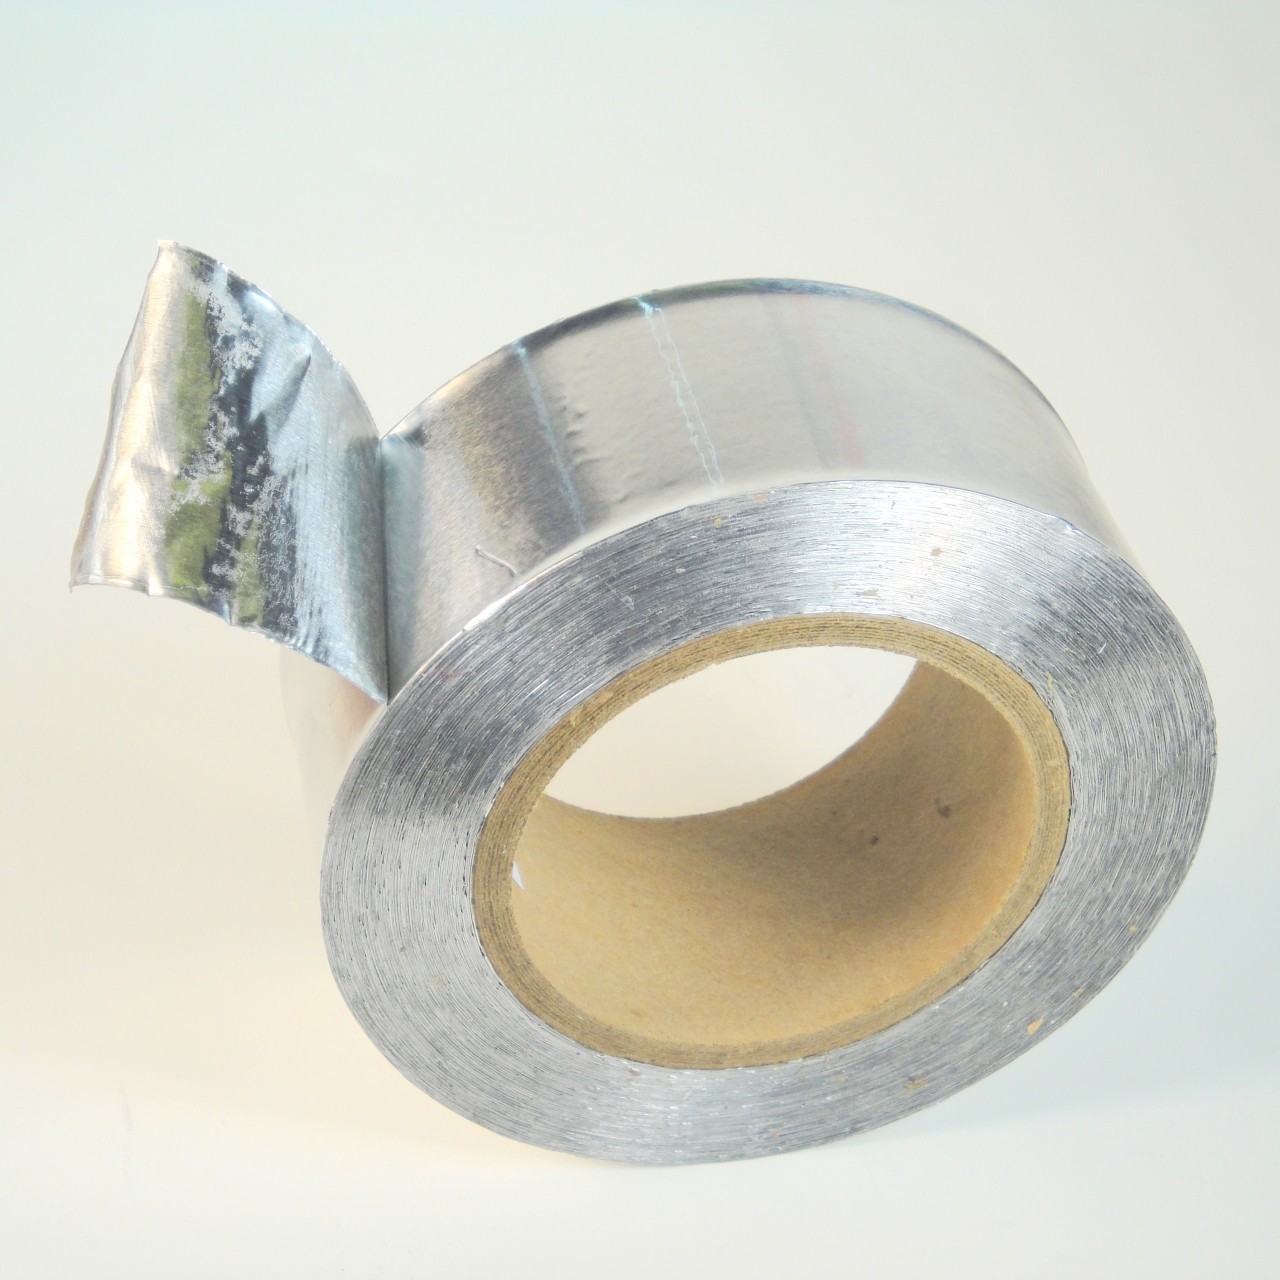 Foil Tape 3 Mil - Self Wound without Liner (46030)